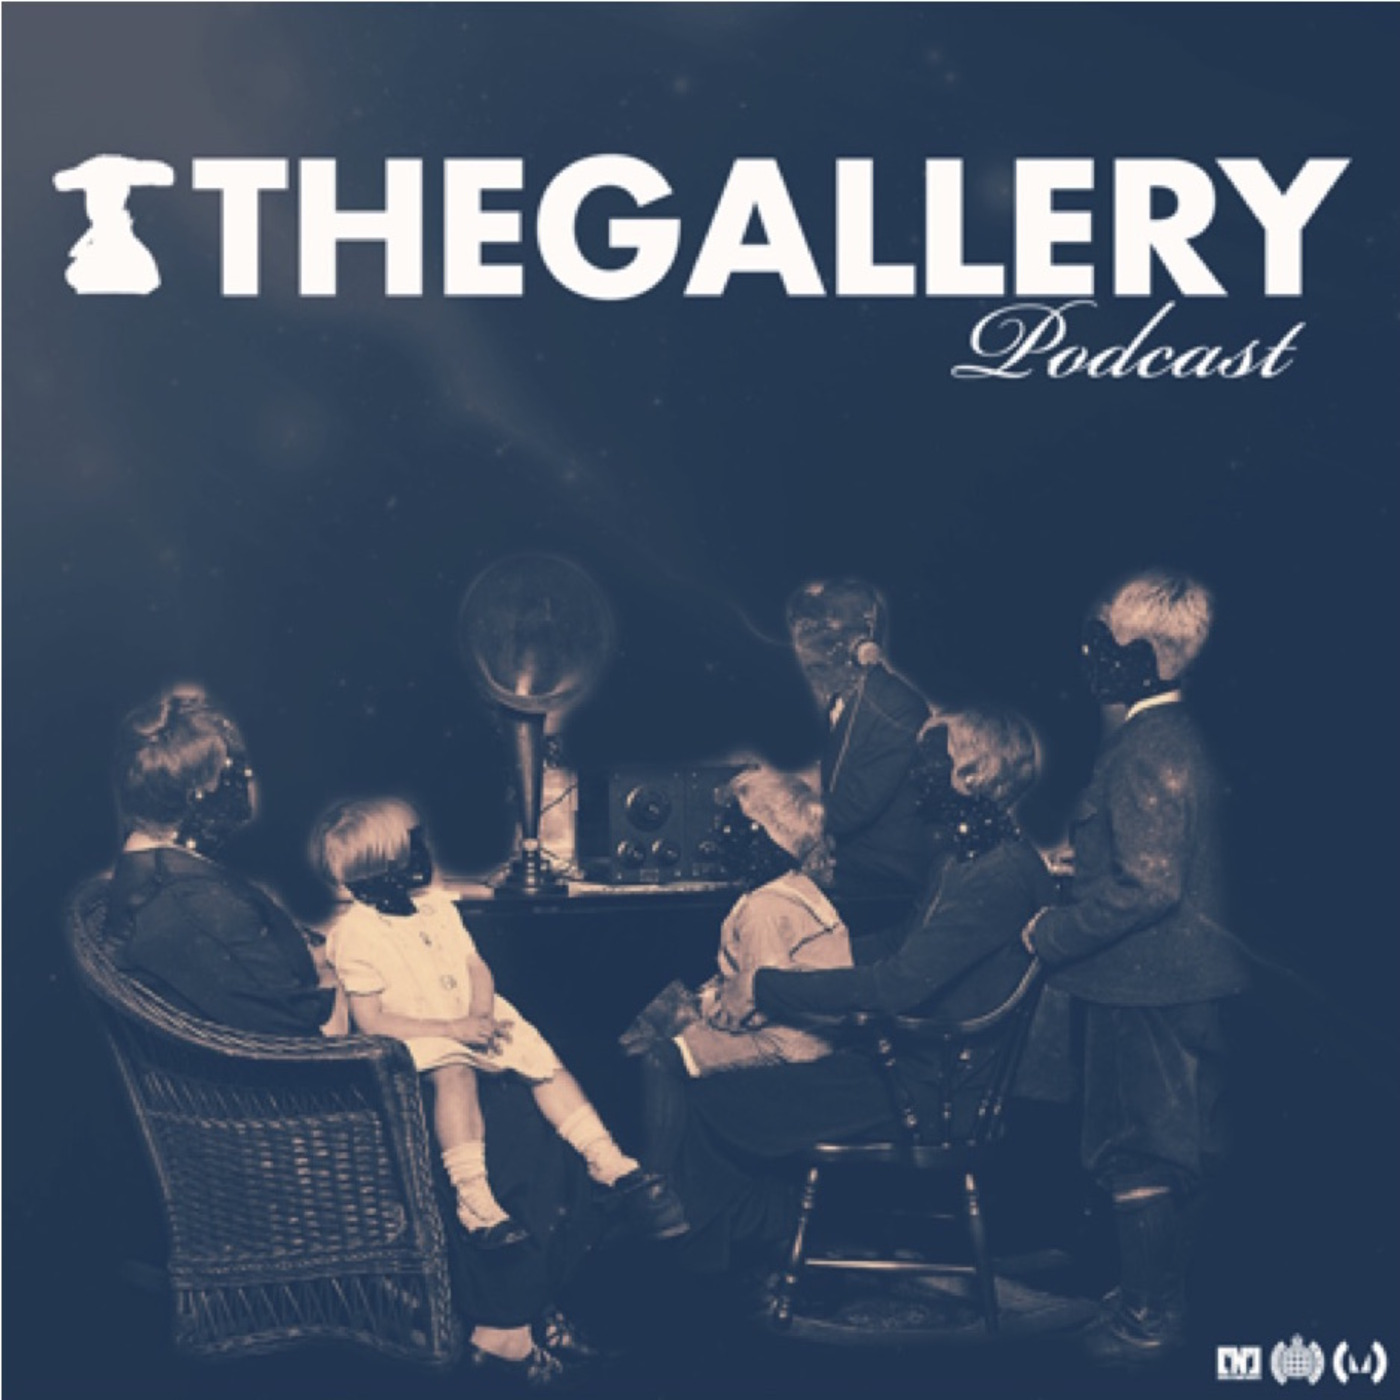  The Gallery Podcast Episode 177 W/ Tristan D + Ferry Corsten Guest Mix